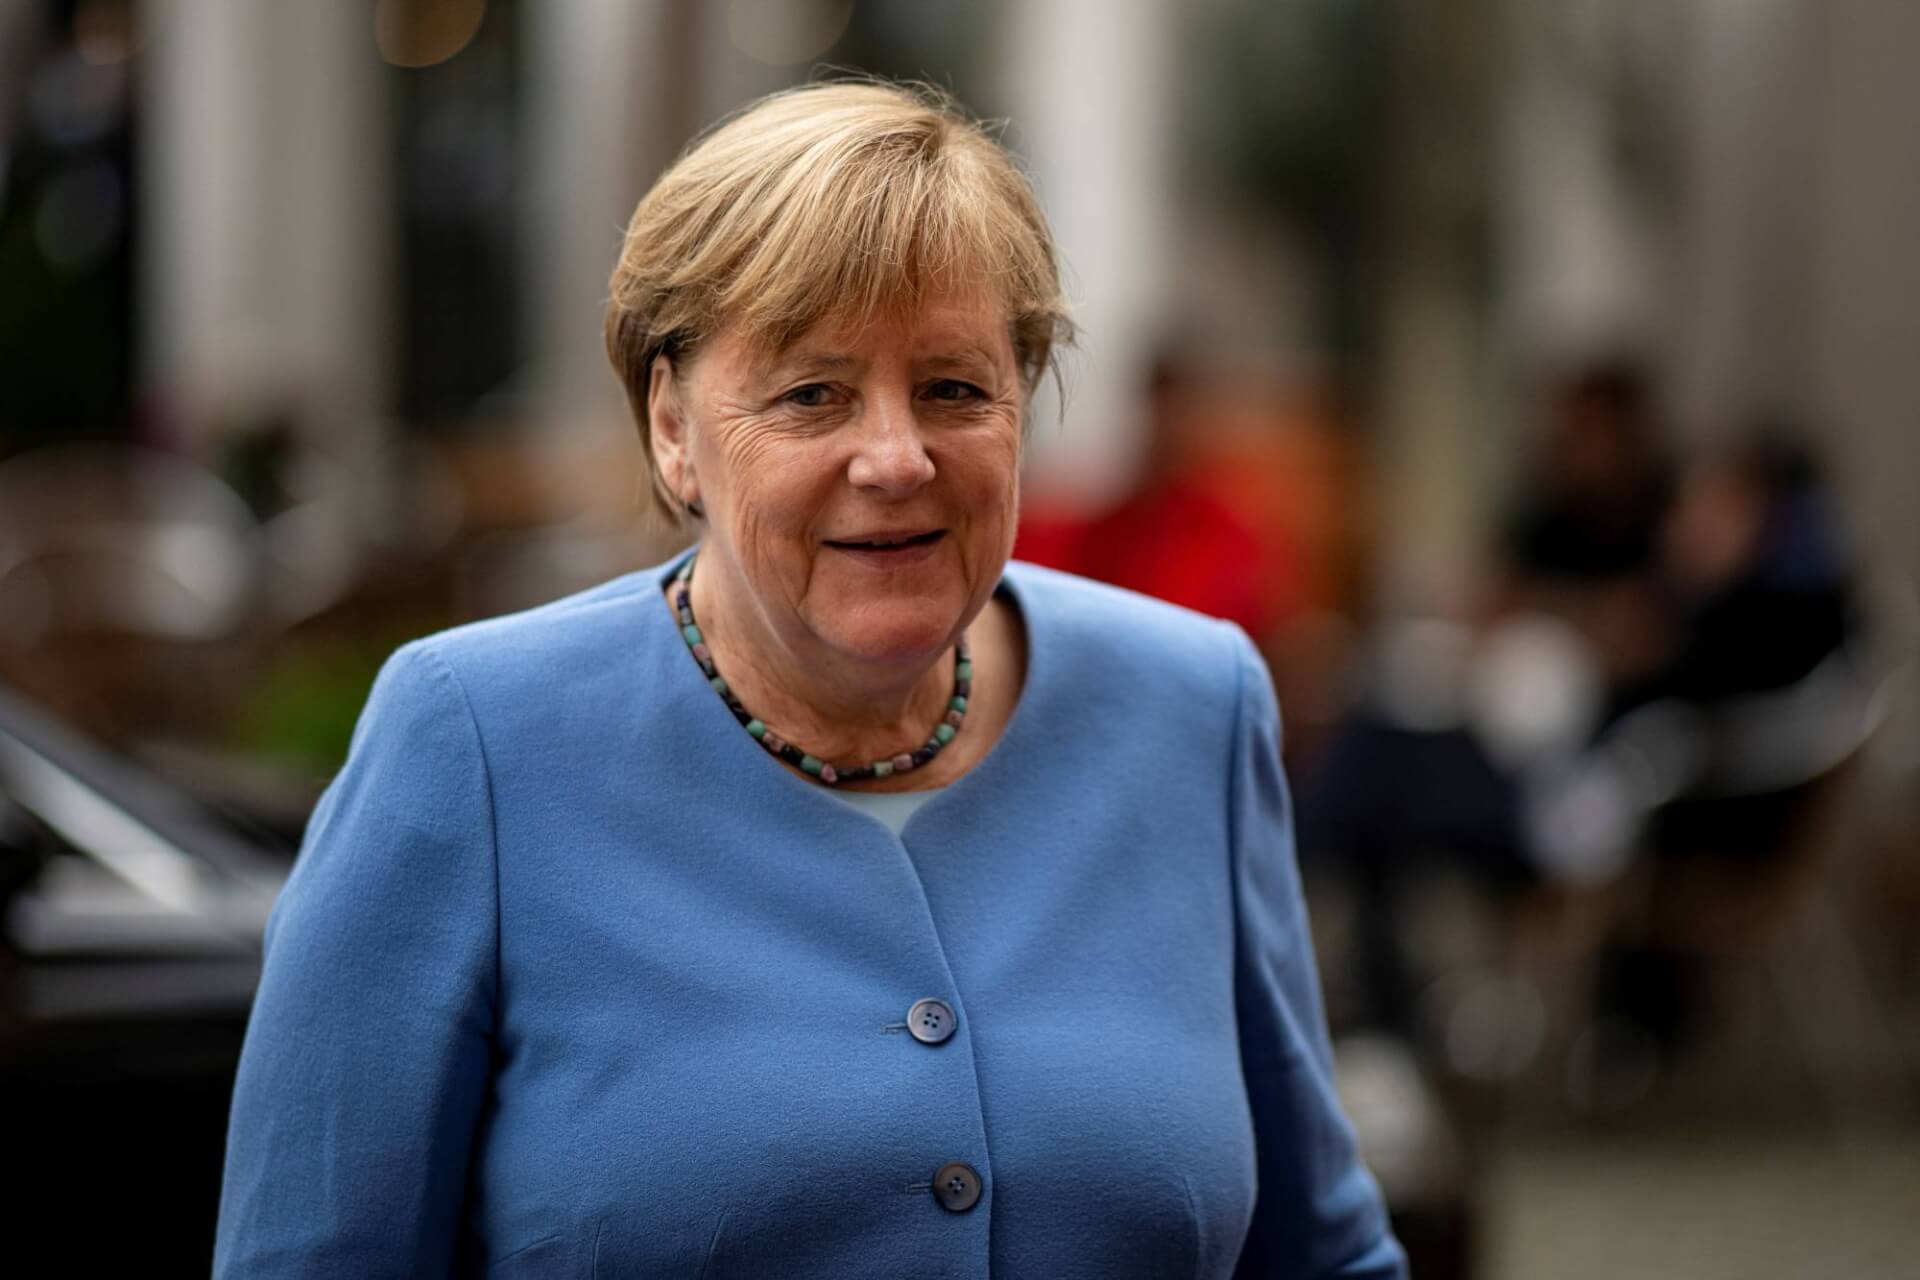 Merkel Reaffirms Support for Belarus’ Democratic Movement in Call With Tsikhanouskaya